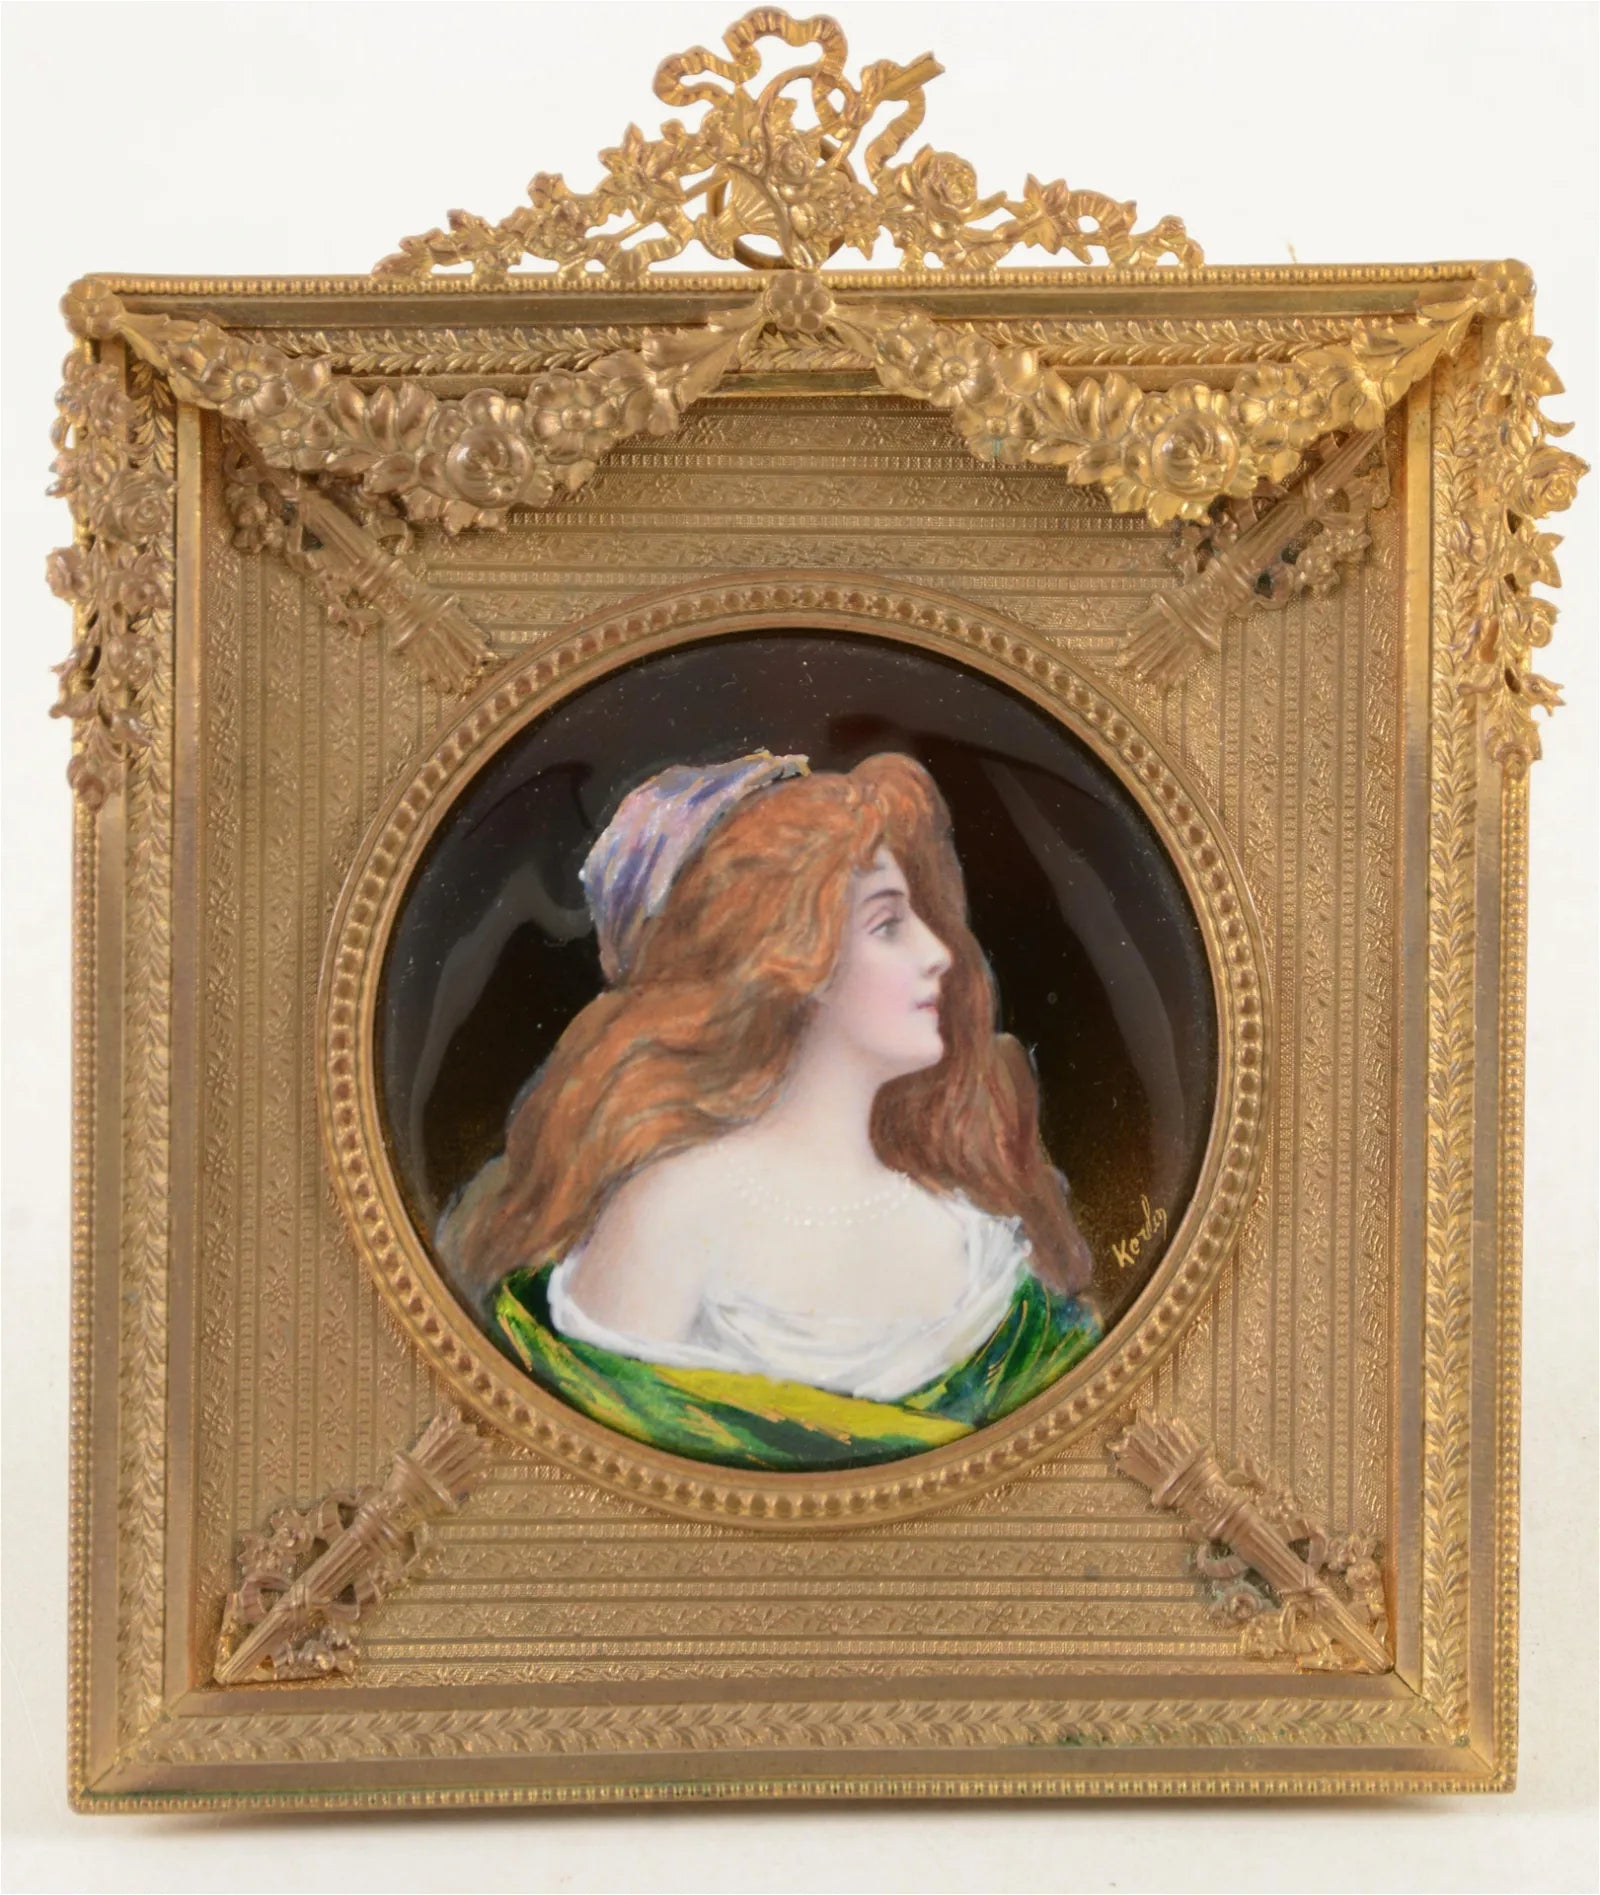 AW585: KEVLER - LATE 19TH C FRENCH ENAMEL PAINTING ON COPPER PANEL